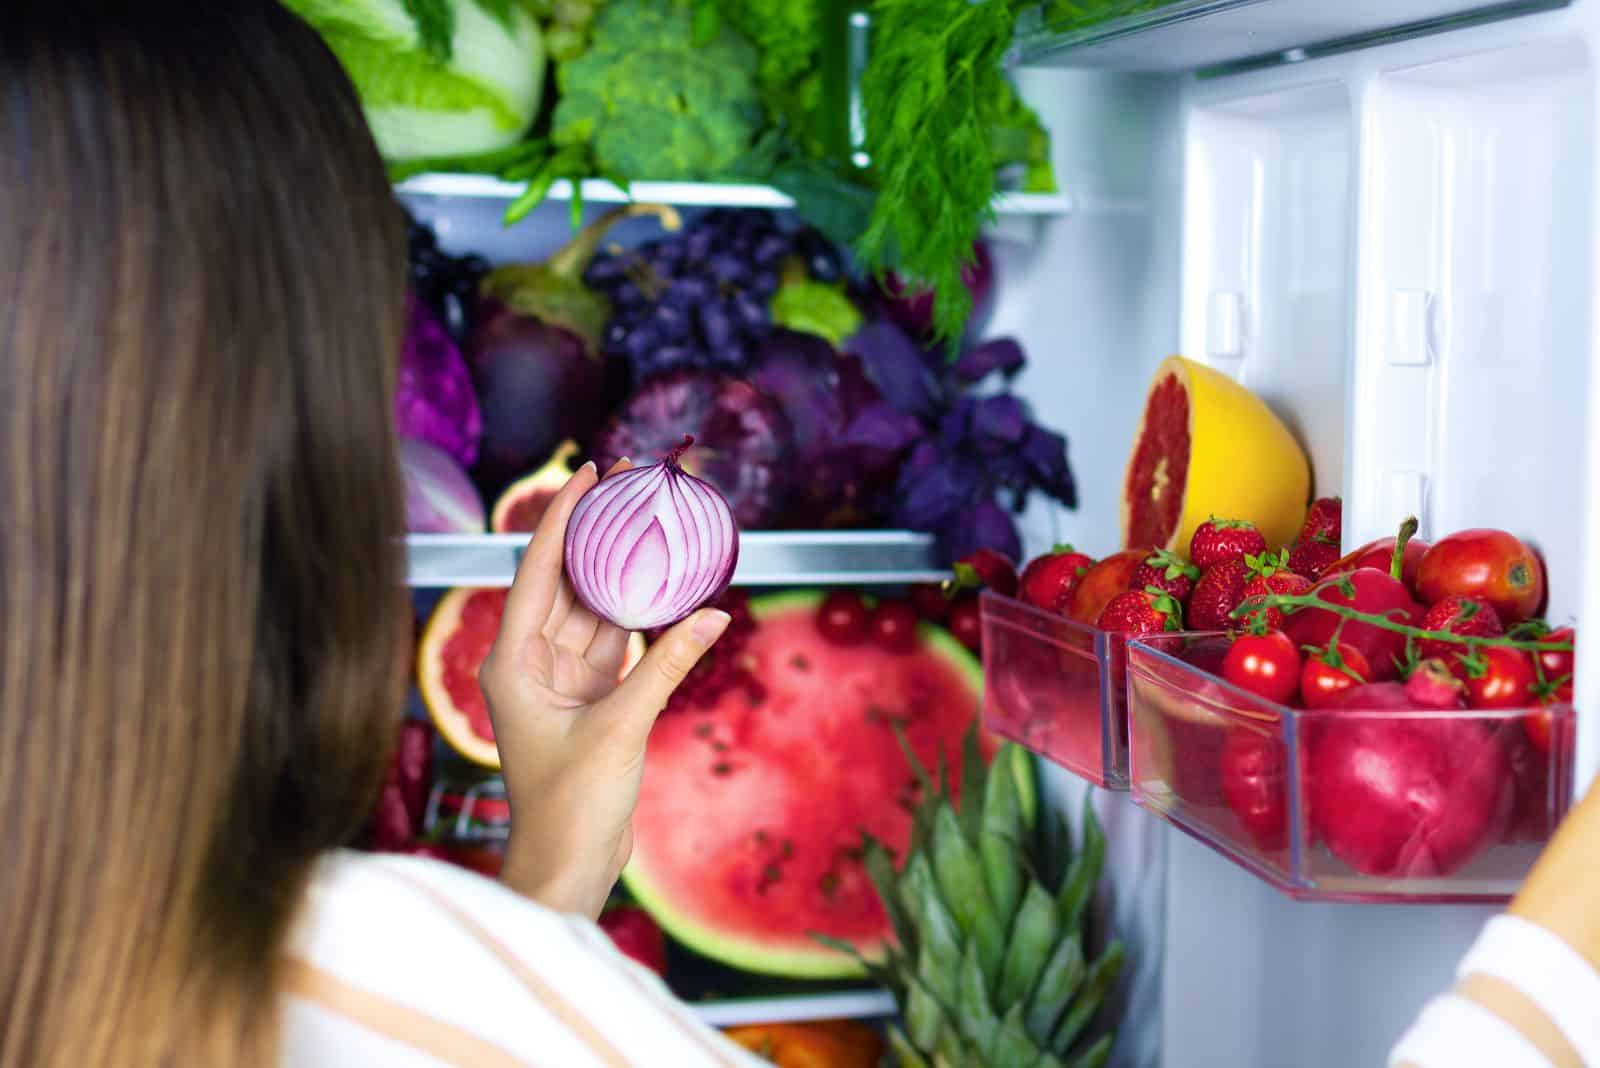 the woman takes out an onion from the refrigerator